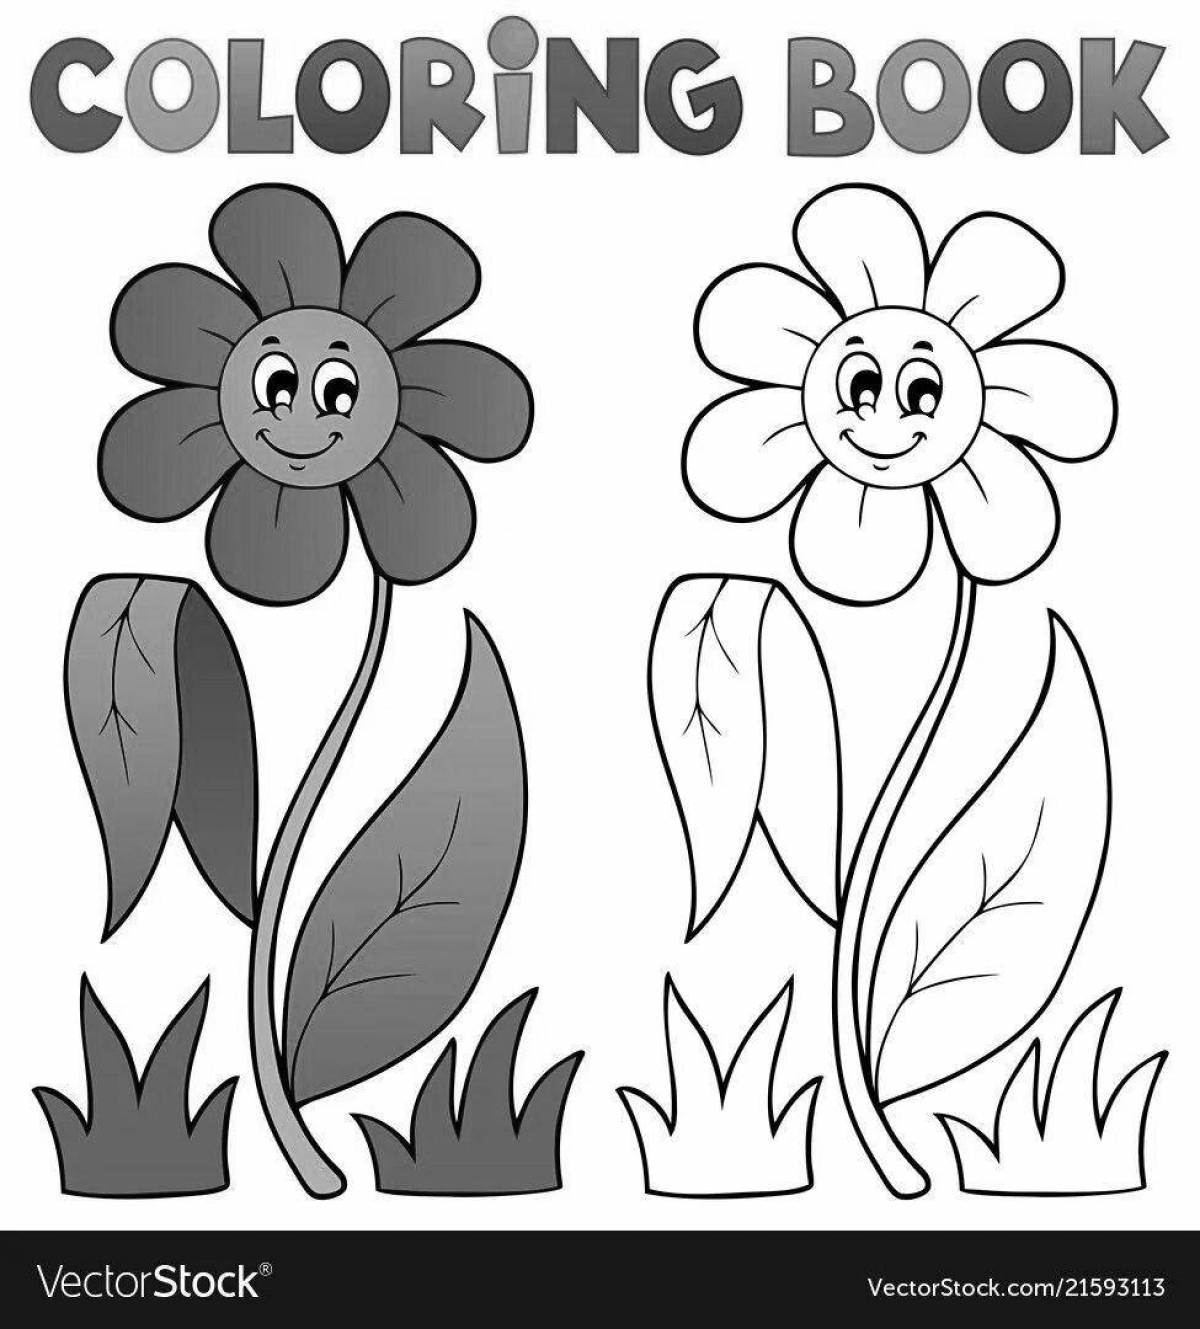 A fun coloring book for 3-4 year olds